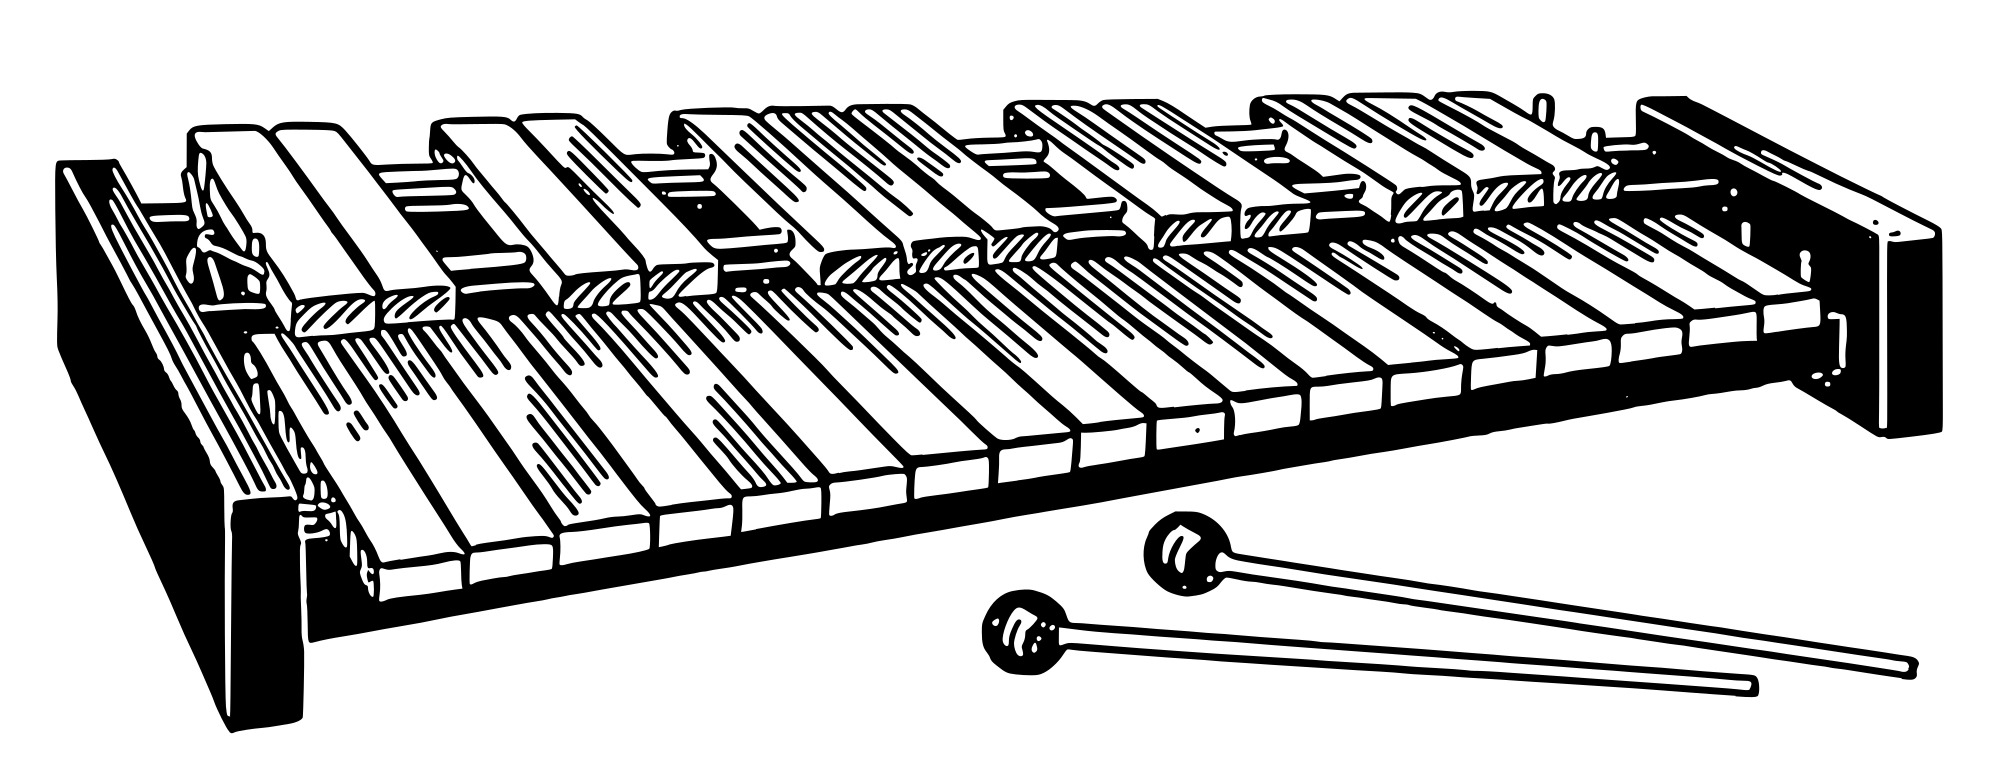 Xylophone Black and White Clipart png icons